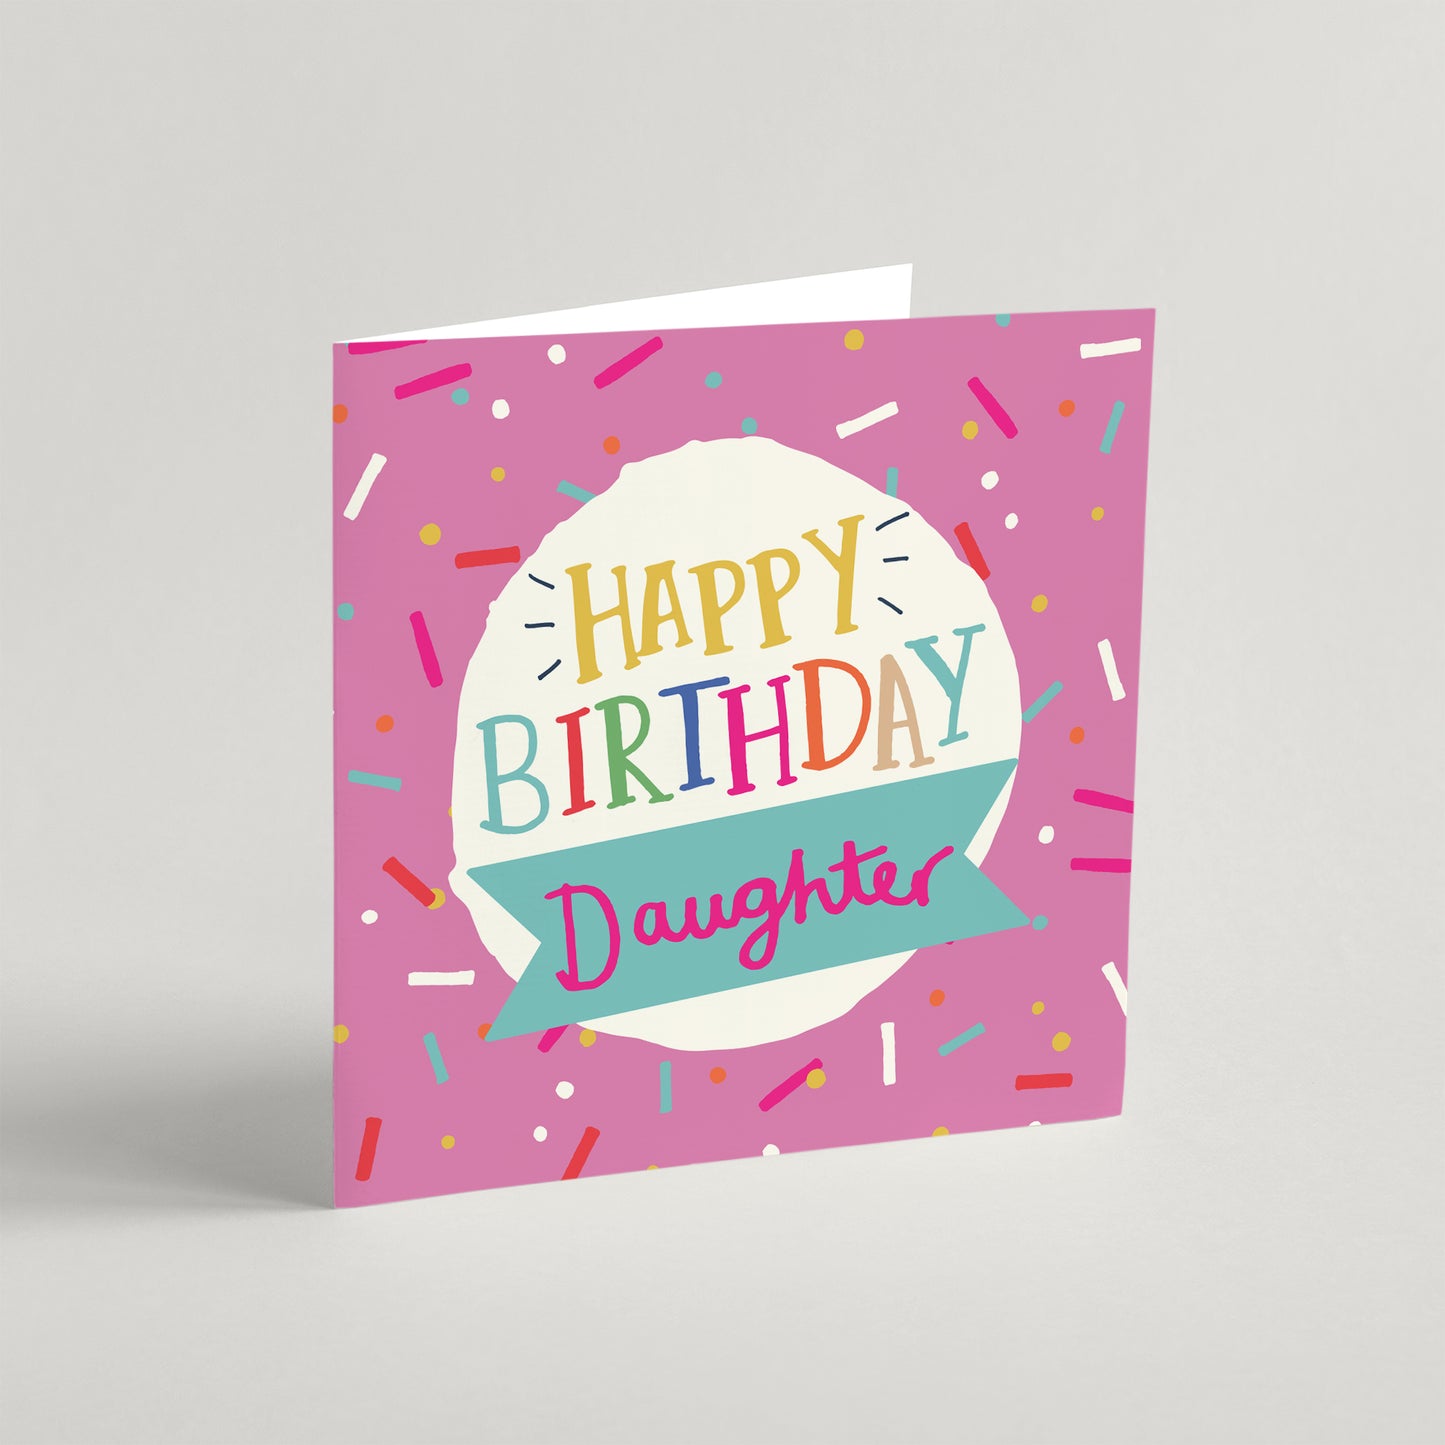 'Happy Birthday Daughter' Greeting Card and Envelope